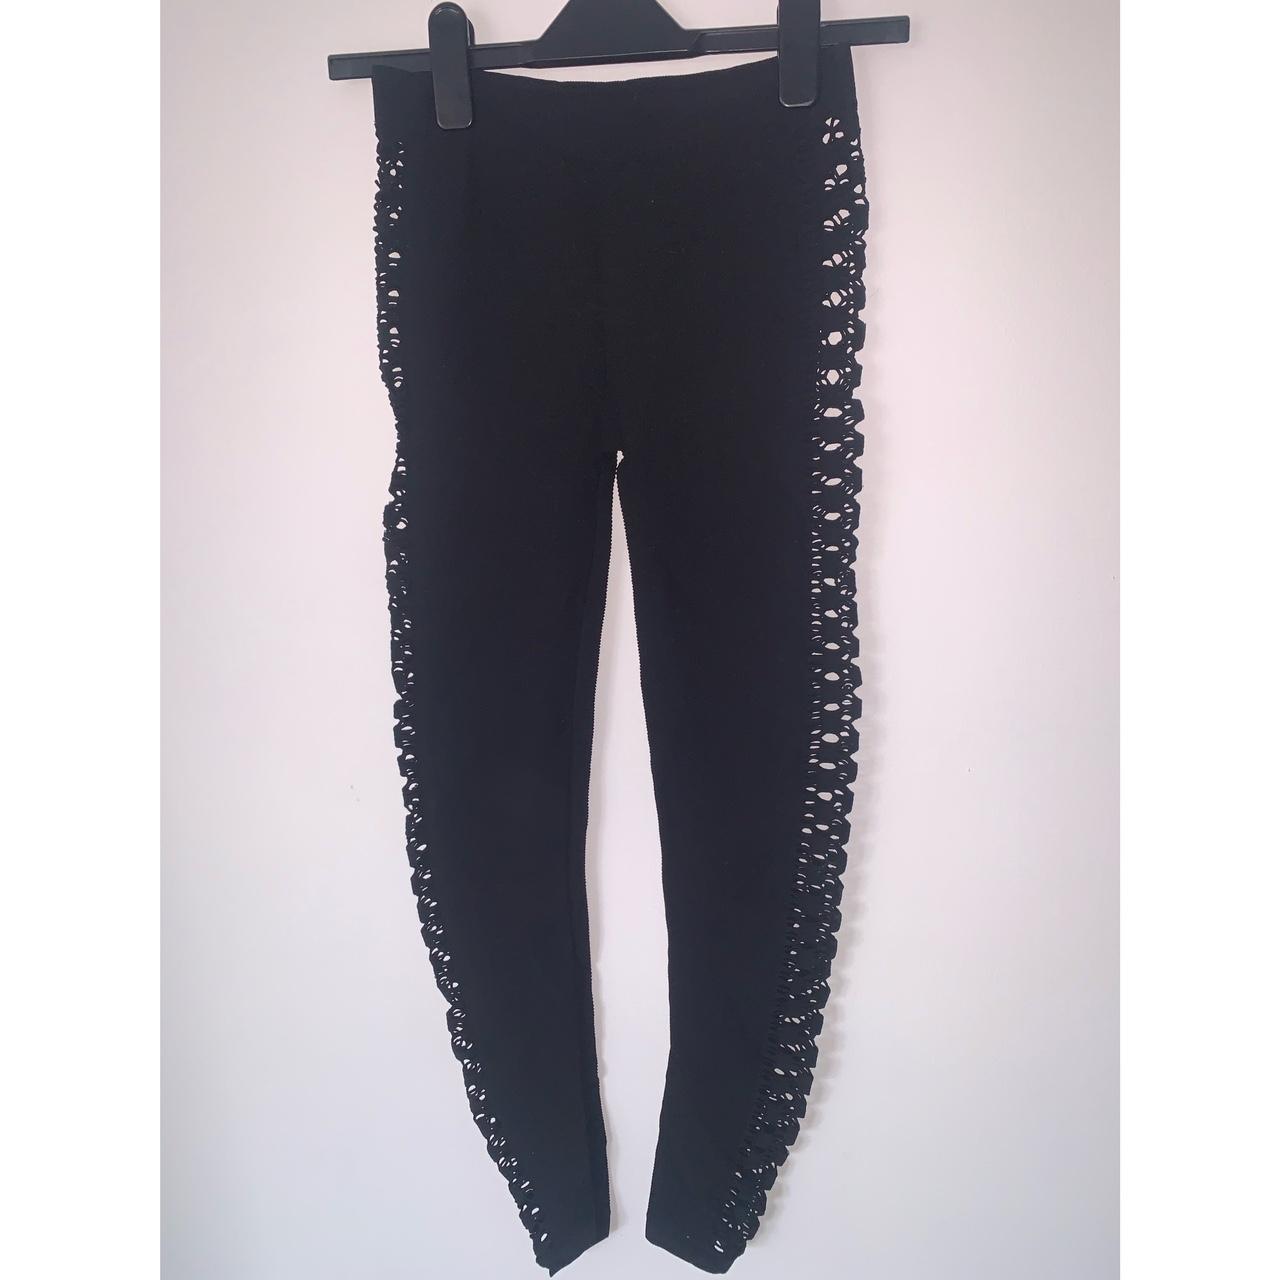 Topshop black leggings with lace side One size, - Depop